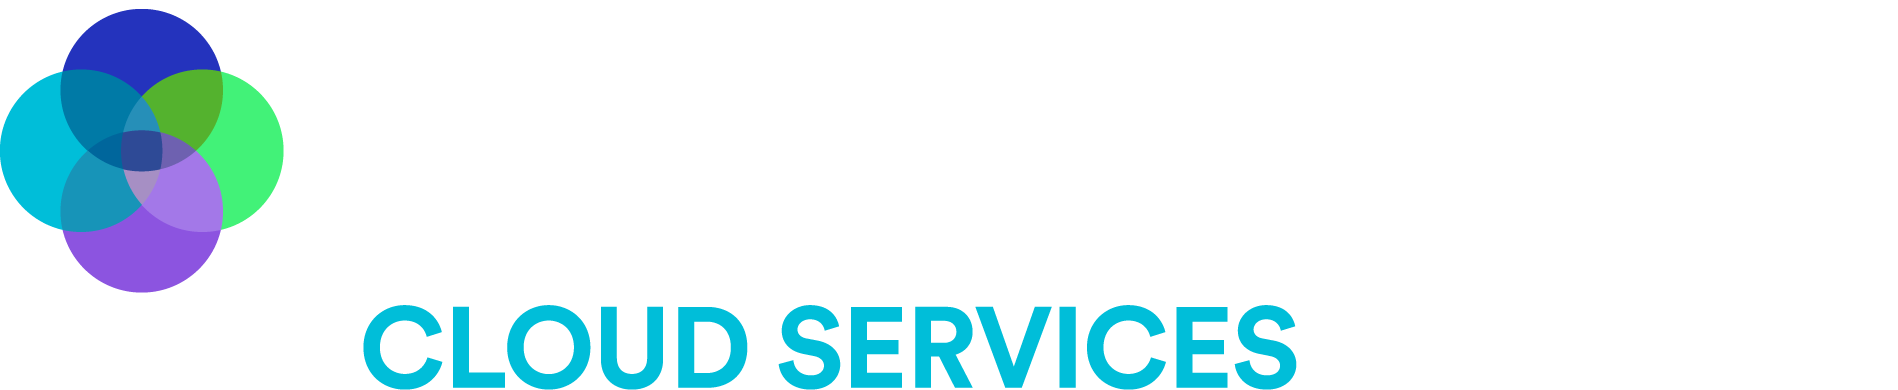 Macquarie Cloud Services are the experts in cloud hosting and colocation data centres for disaster recovery - logo part of the Macquarie Telecom Group